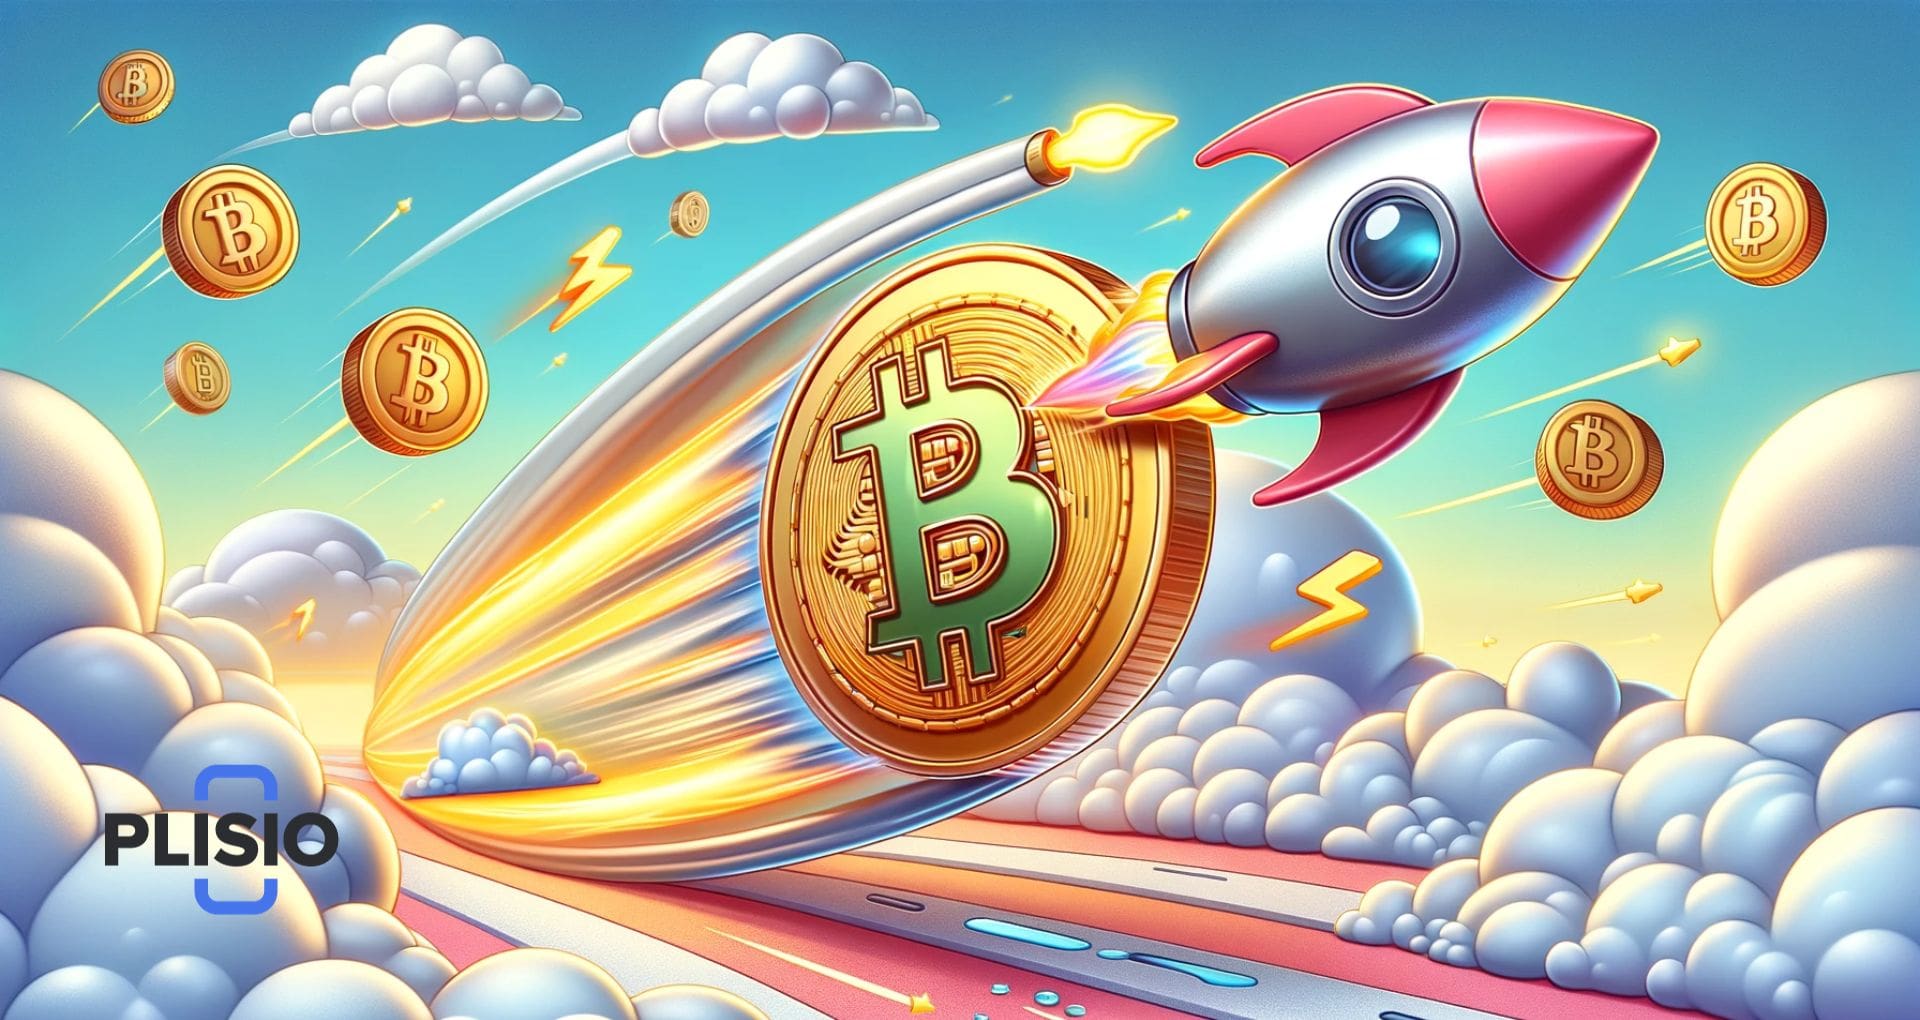 How to speed up a Bitcoin transaction